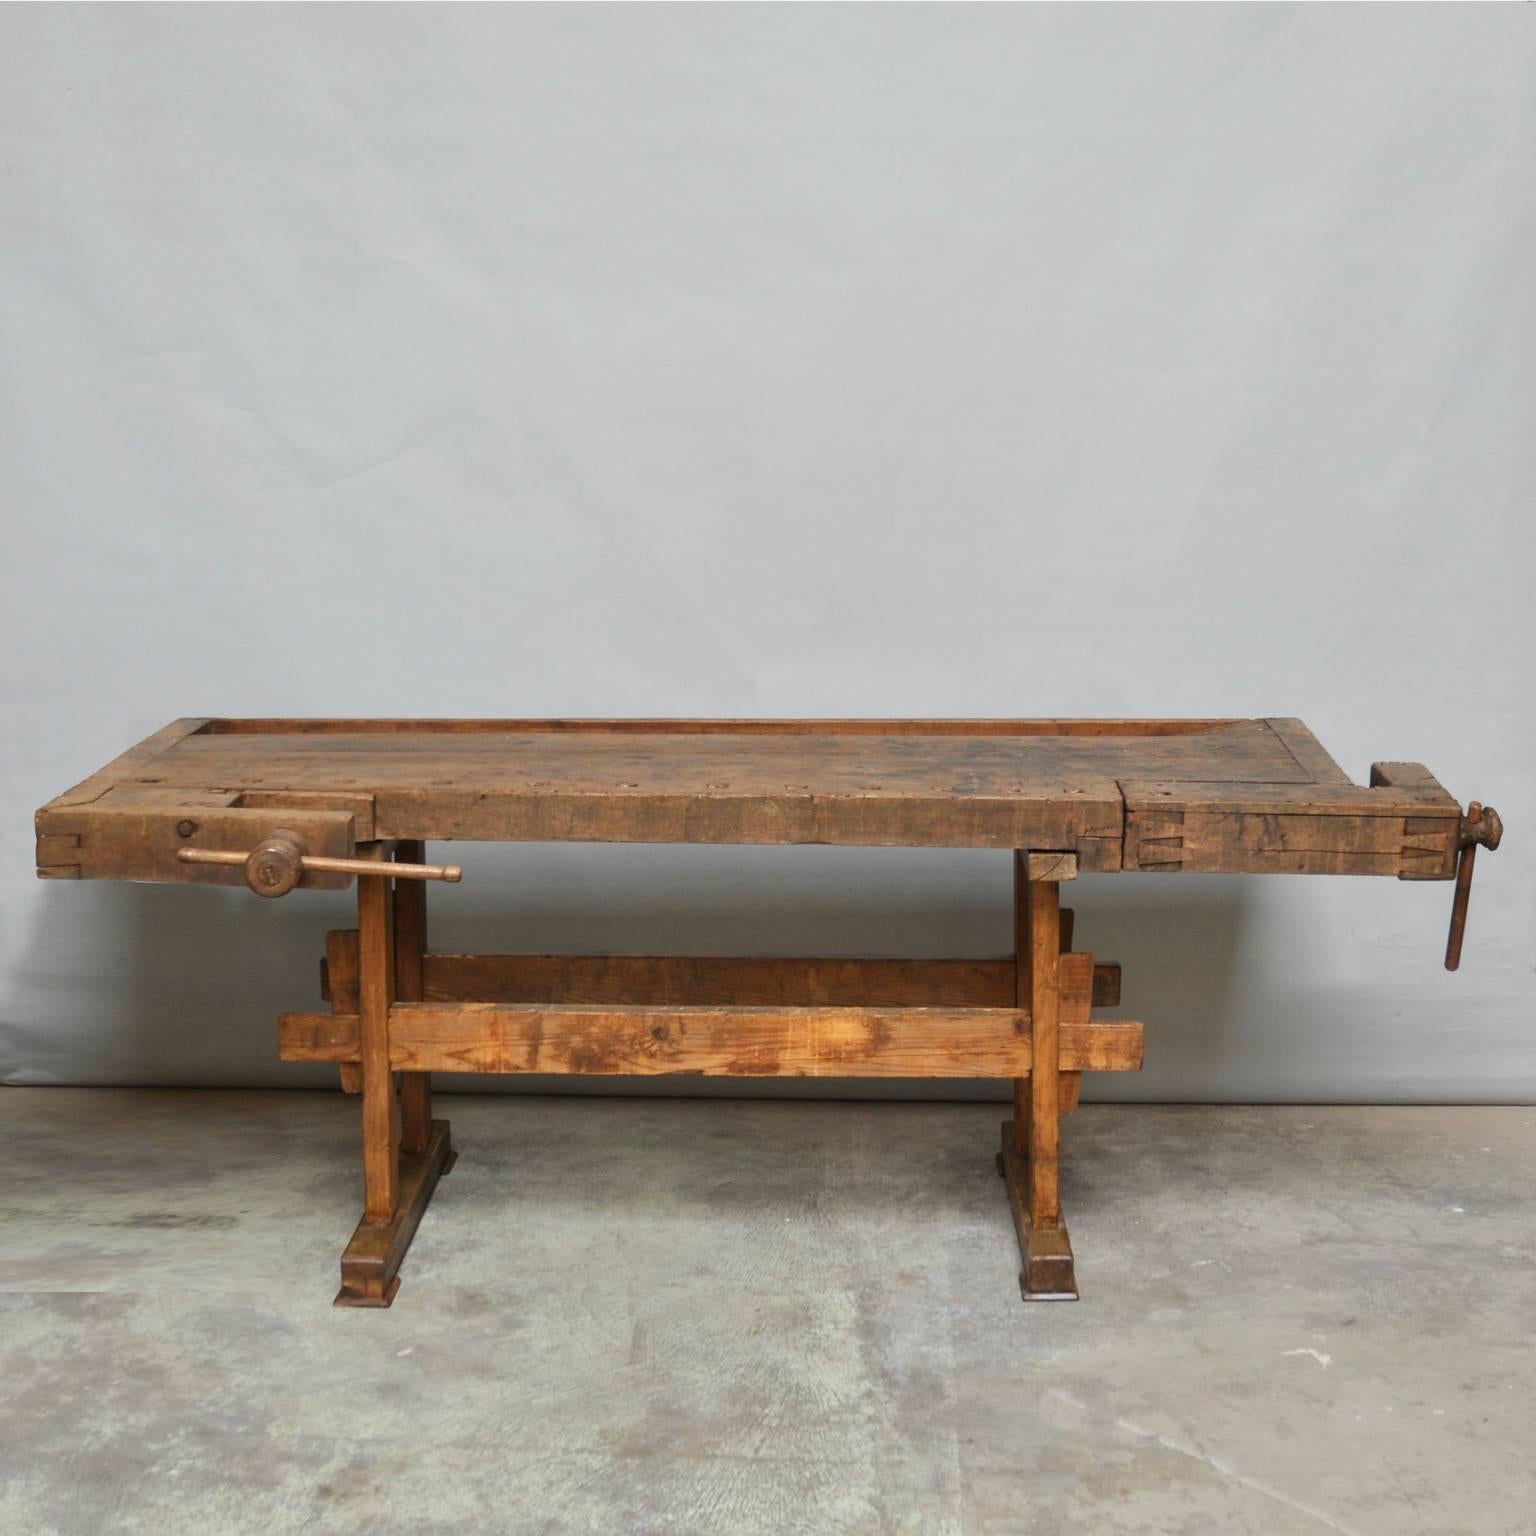 This vintage Hungarian carpenter’s workbench features two vices and a recessed tray where the carpenter would lay his tools. It was manufactured, circa 1935.